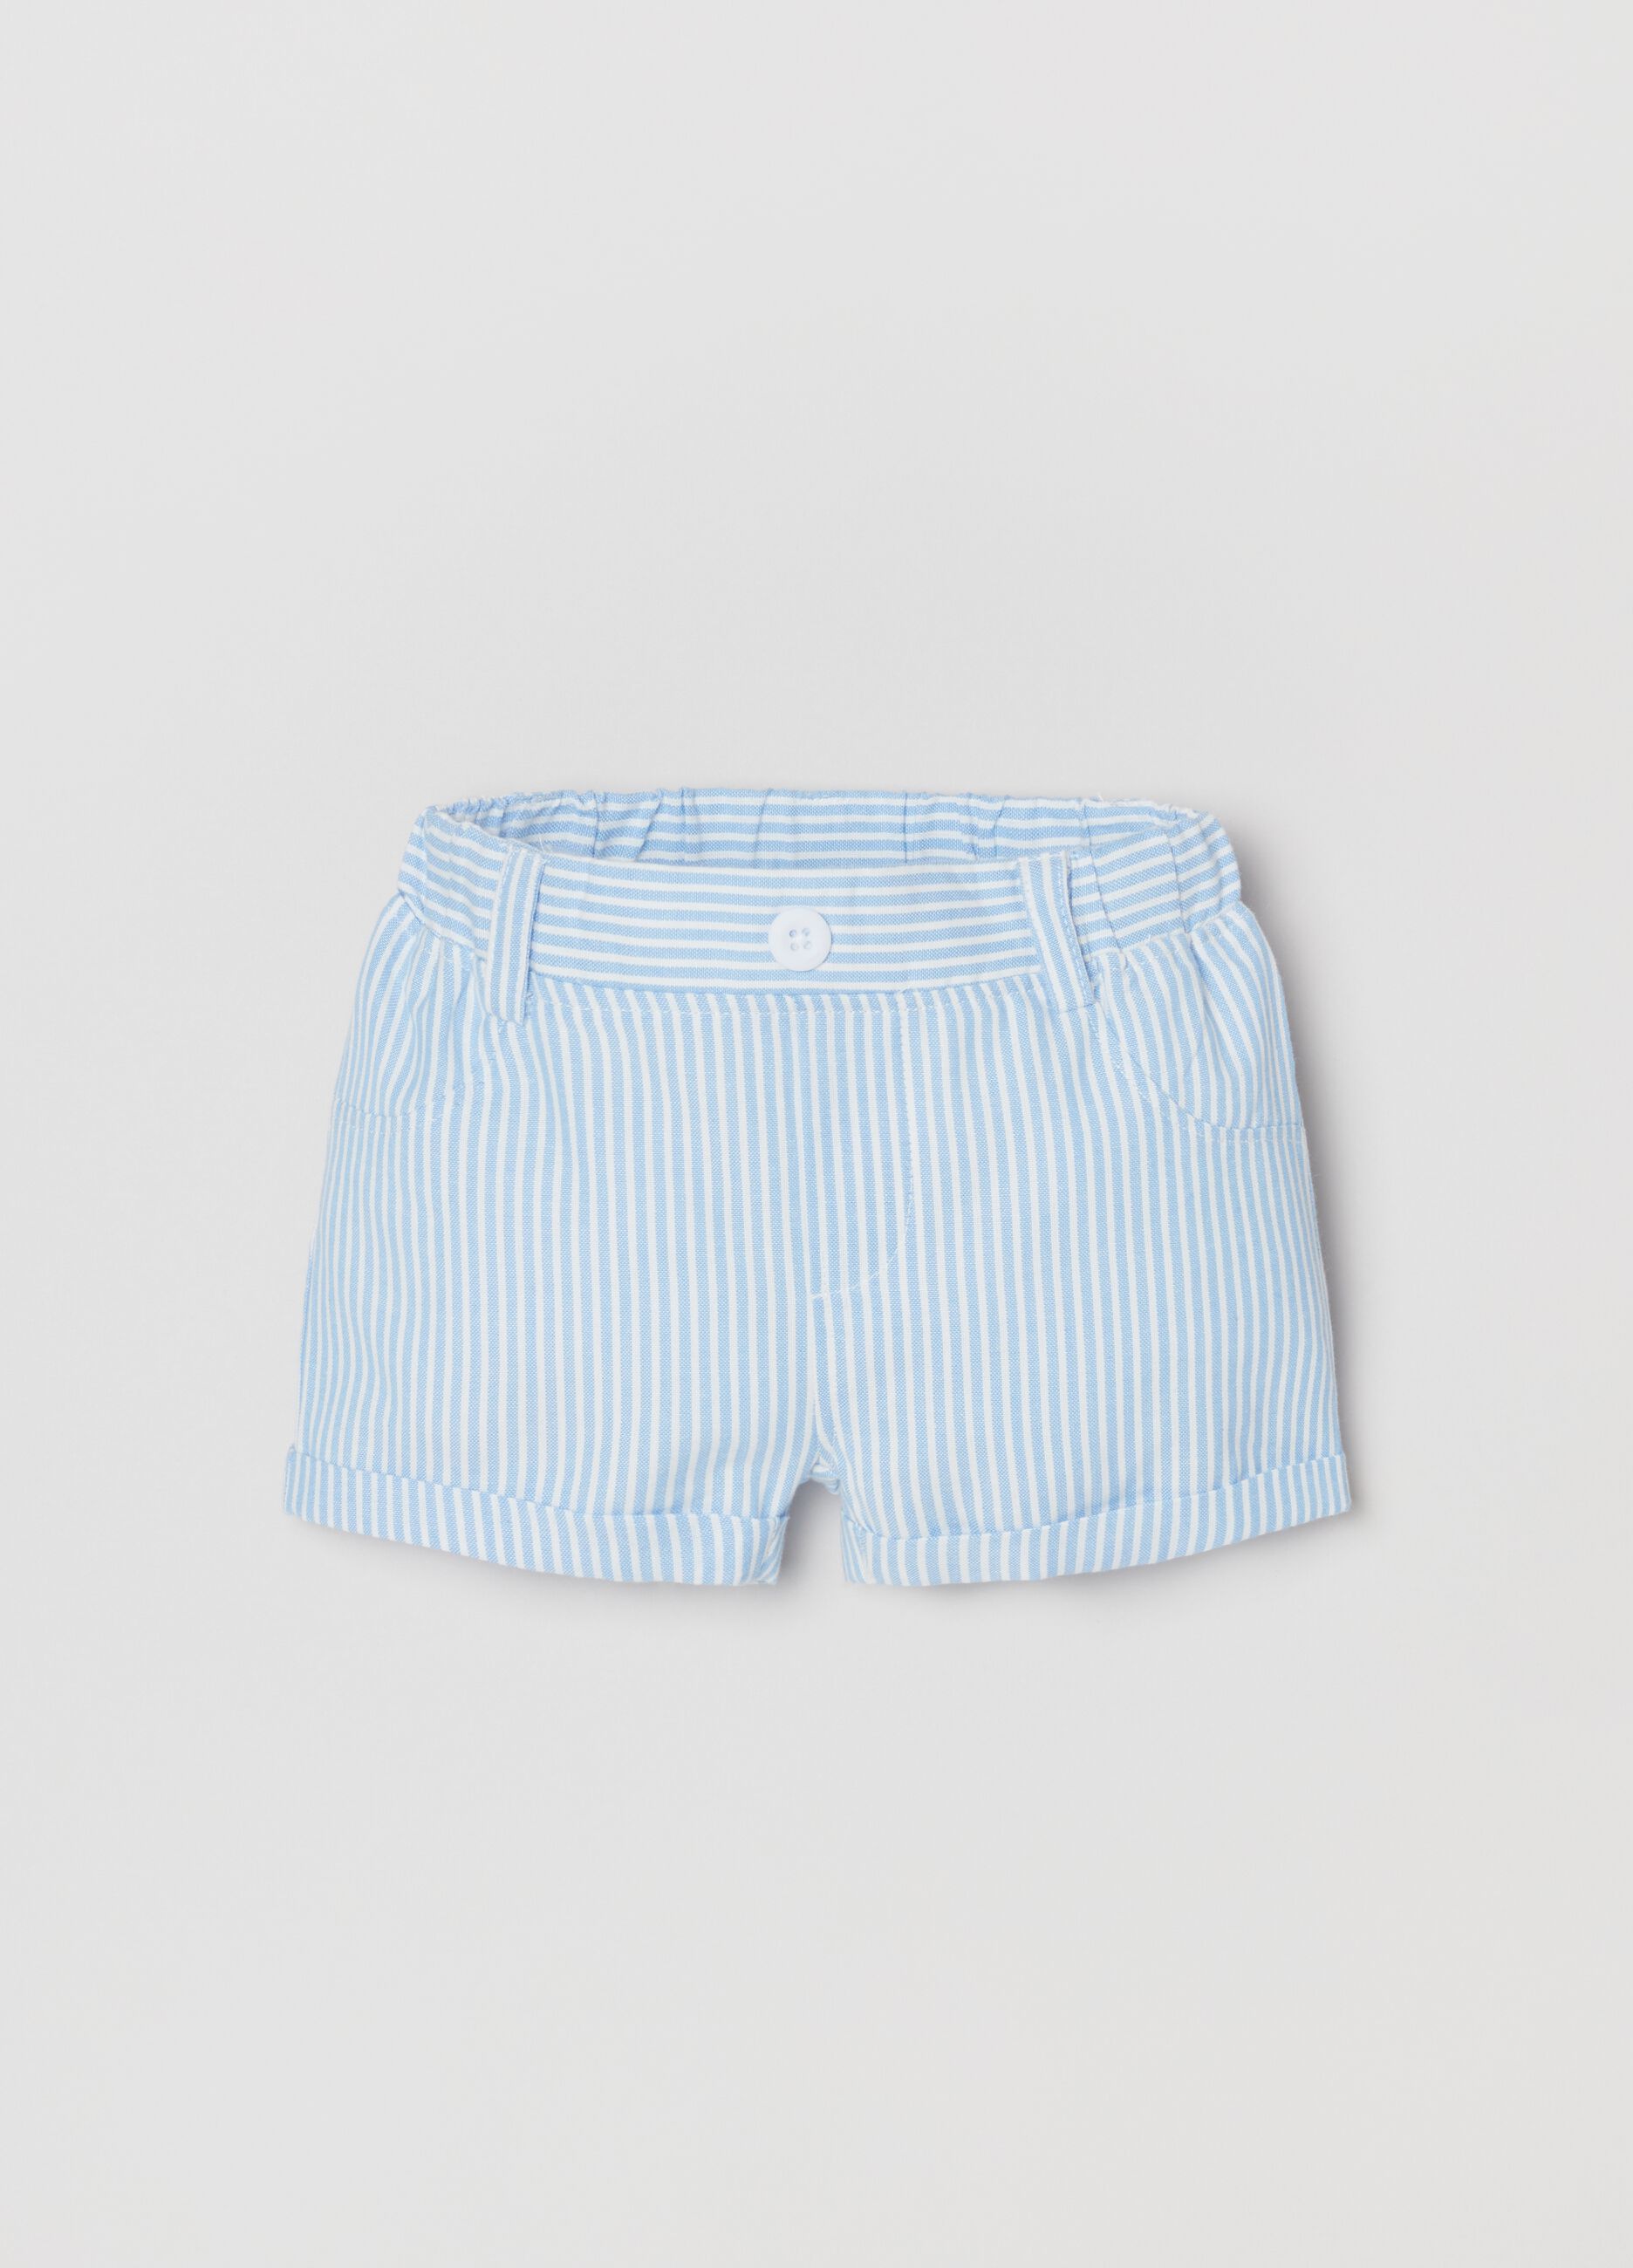 Striped shorts in cotton